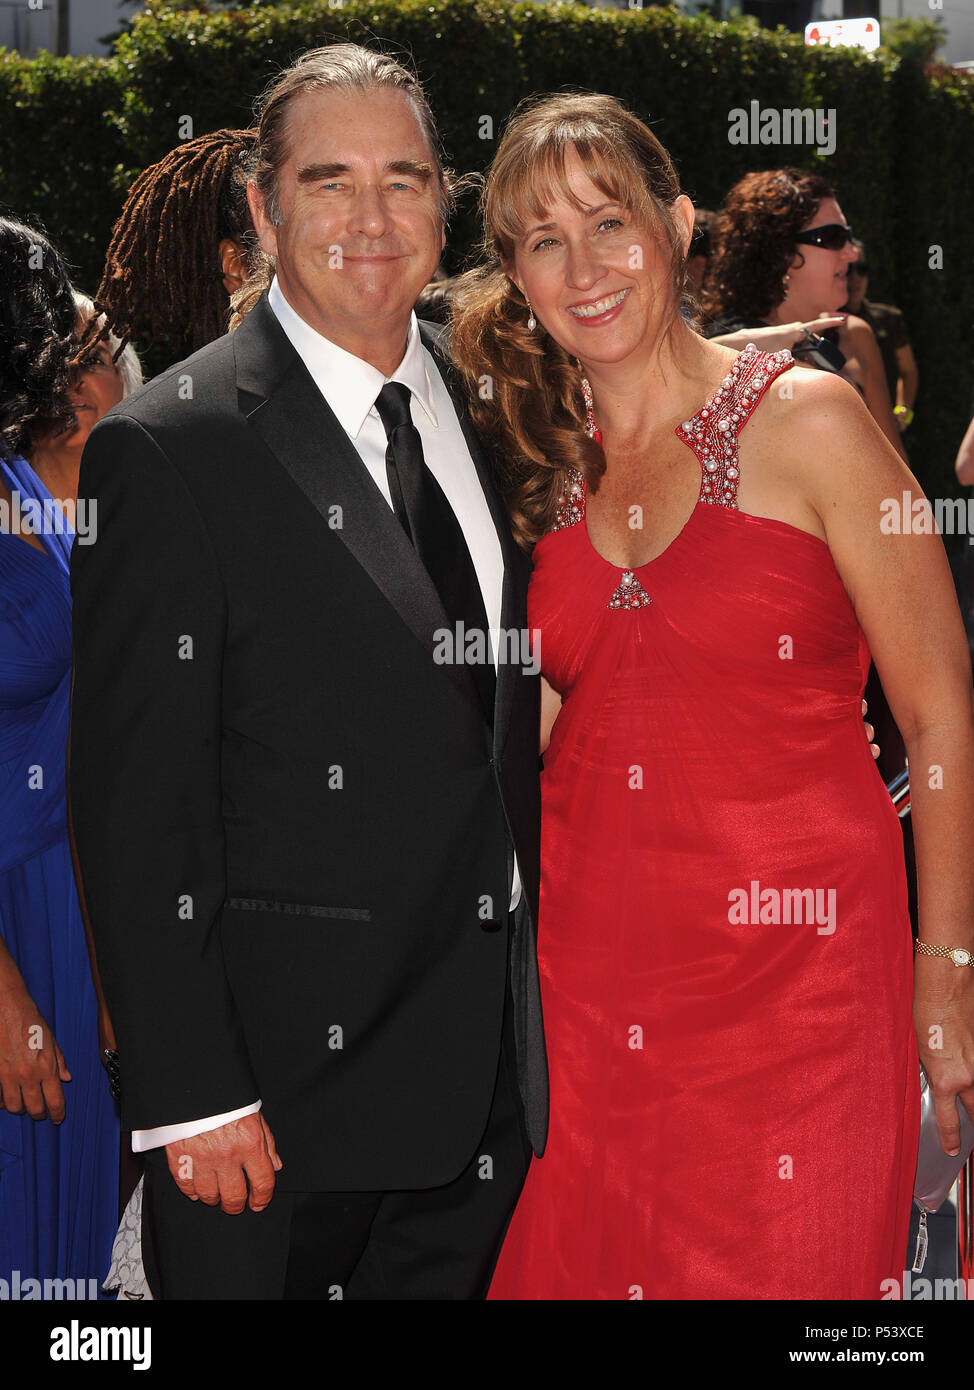 Beau Bridges and wife Wendy 2010 Creative Emmy Awards at the Nokia Theatre In Los Angeles.BeauBridges Wendy 57  Event in Hollywood Life - California, Red Carpet Event, USA, Film Industry, Celebrities, Photography, Bestof, Arts Culture and Entertainment, Celebrities fashion, Best of, Hollywood Life, Event in Hollywood Life - California, Red Carpet and backstage, Music celebrities, Topix, Couple, family ( husband and wife ) and kids- Children, brothers and sisters inquiry tsuni@Gamma-USA.com, Credit Tsuni / USA, 2010 Stock Photo